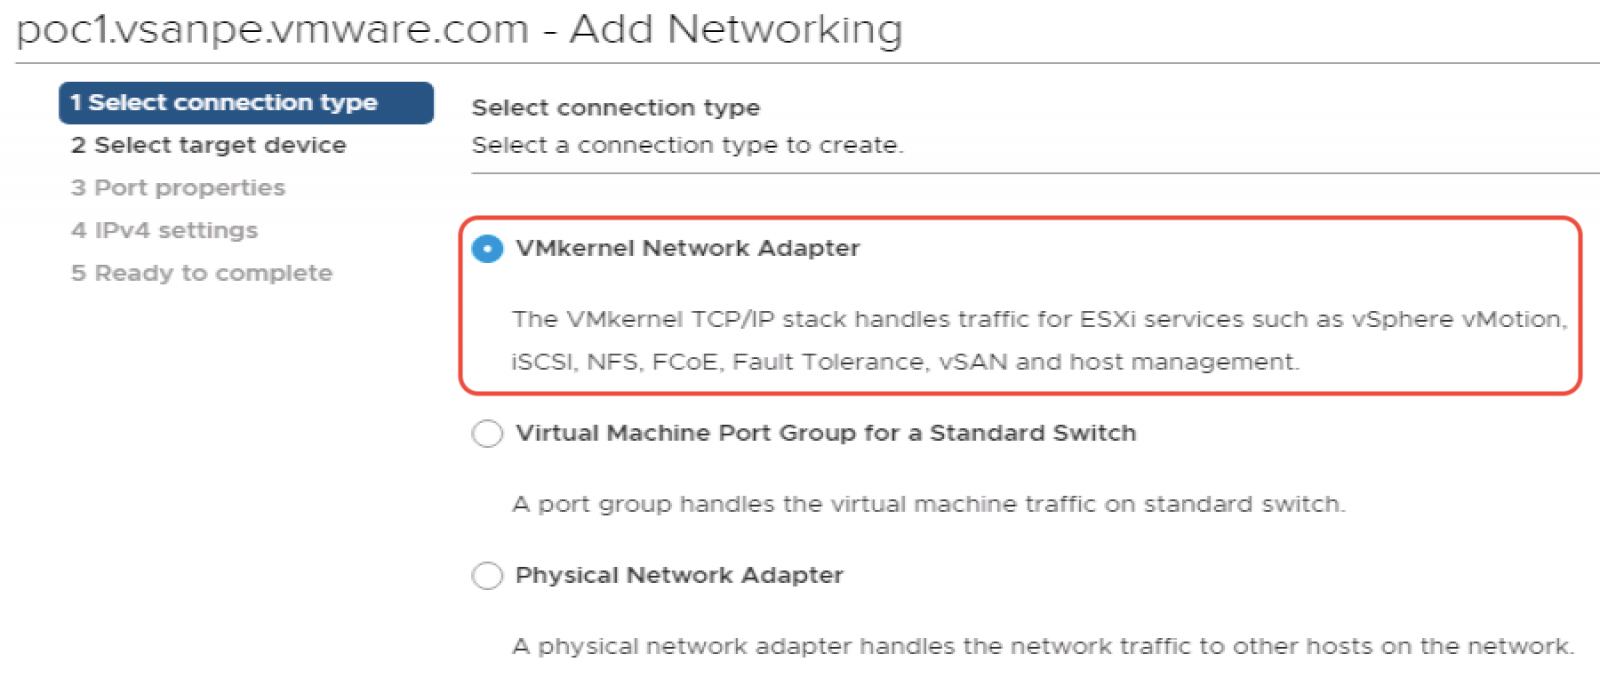 Ensure that VMkernel Network Adapter is chosen as the connection type